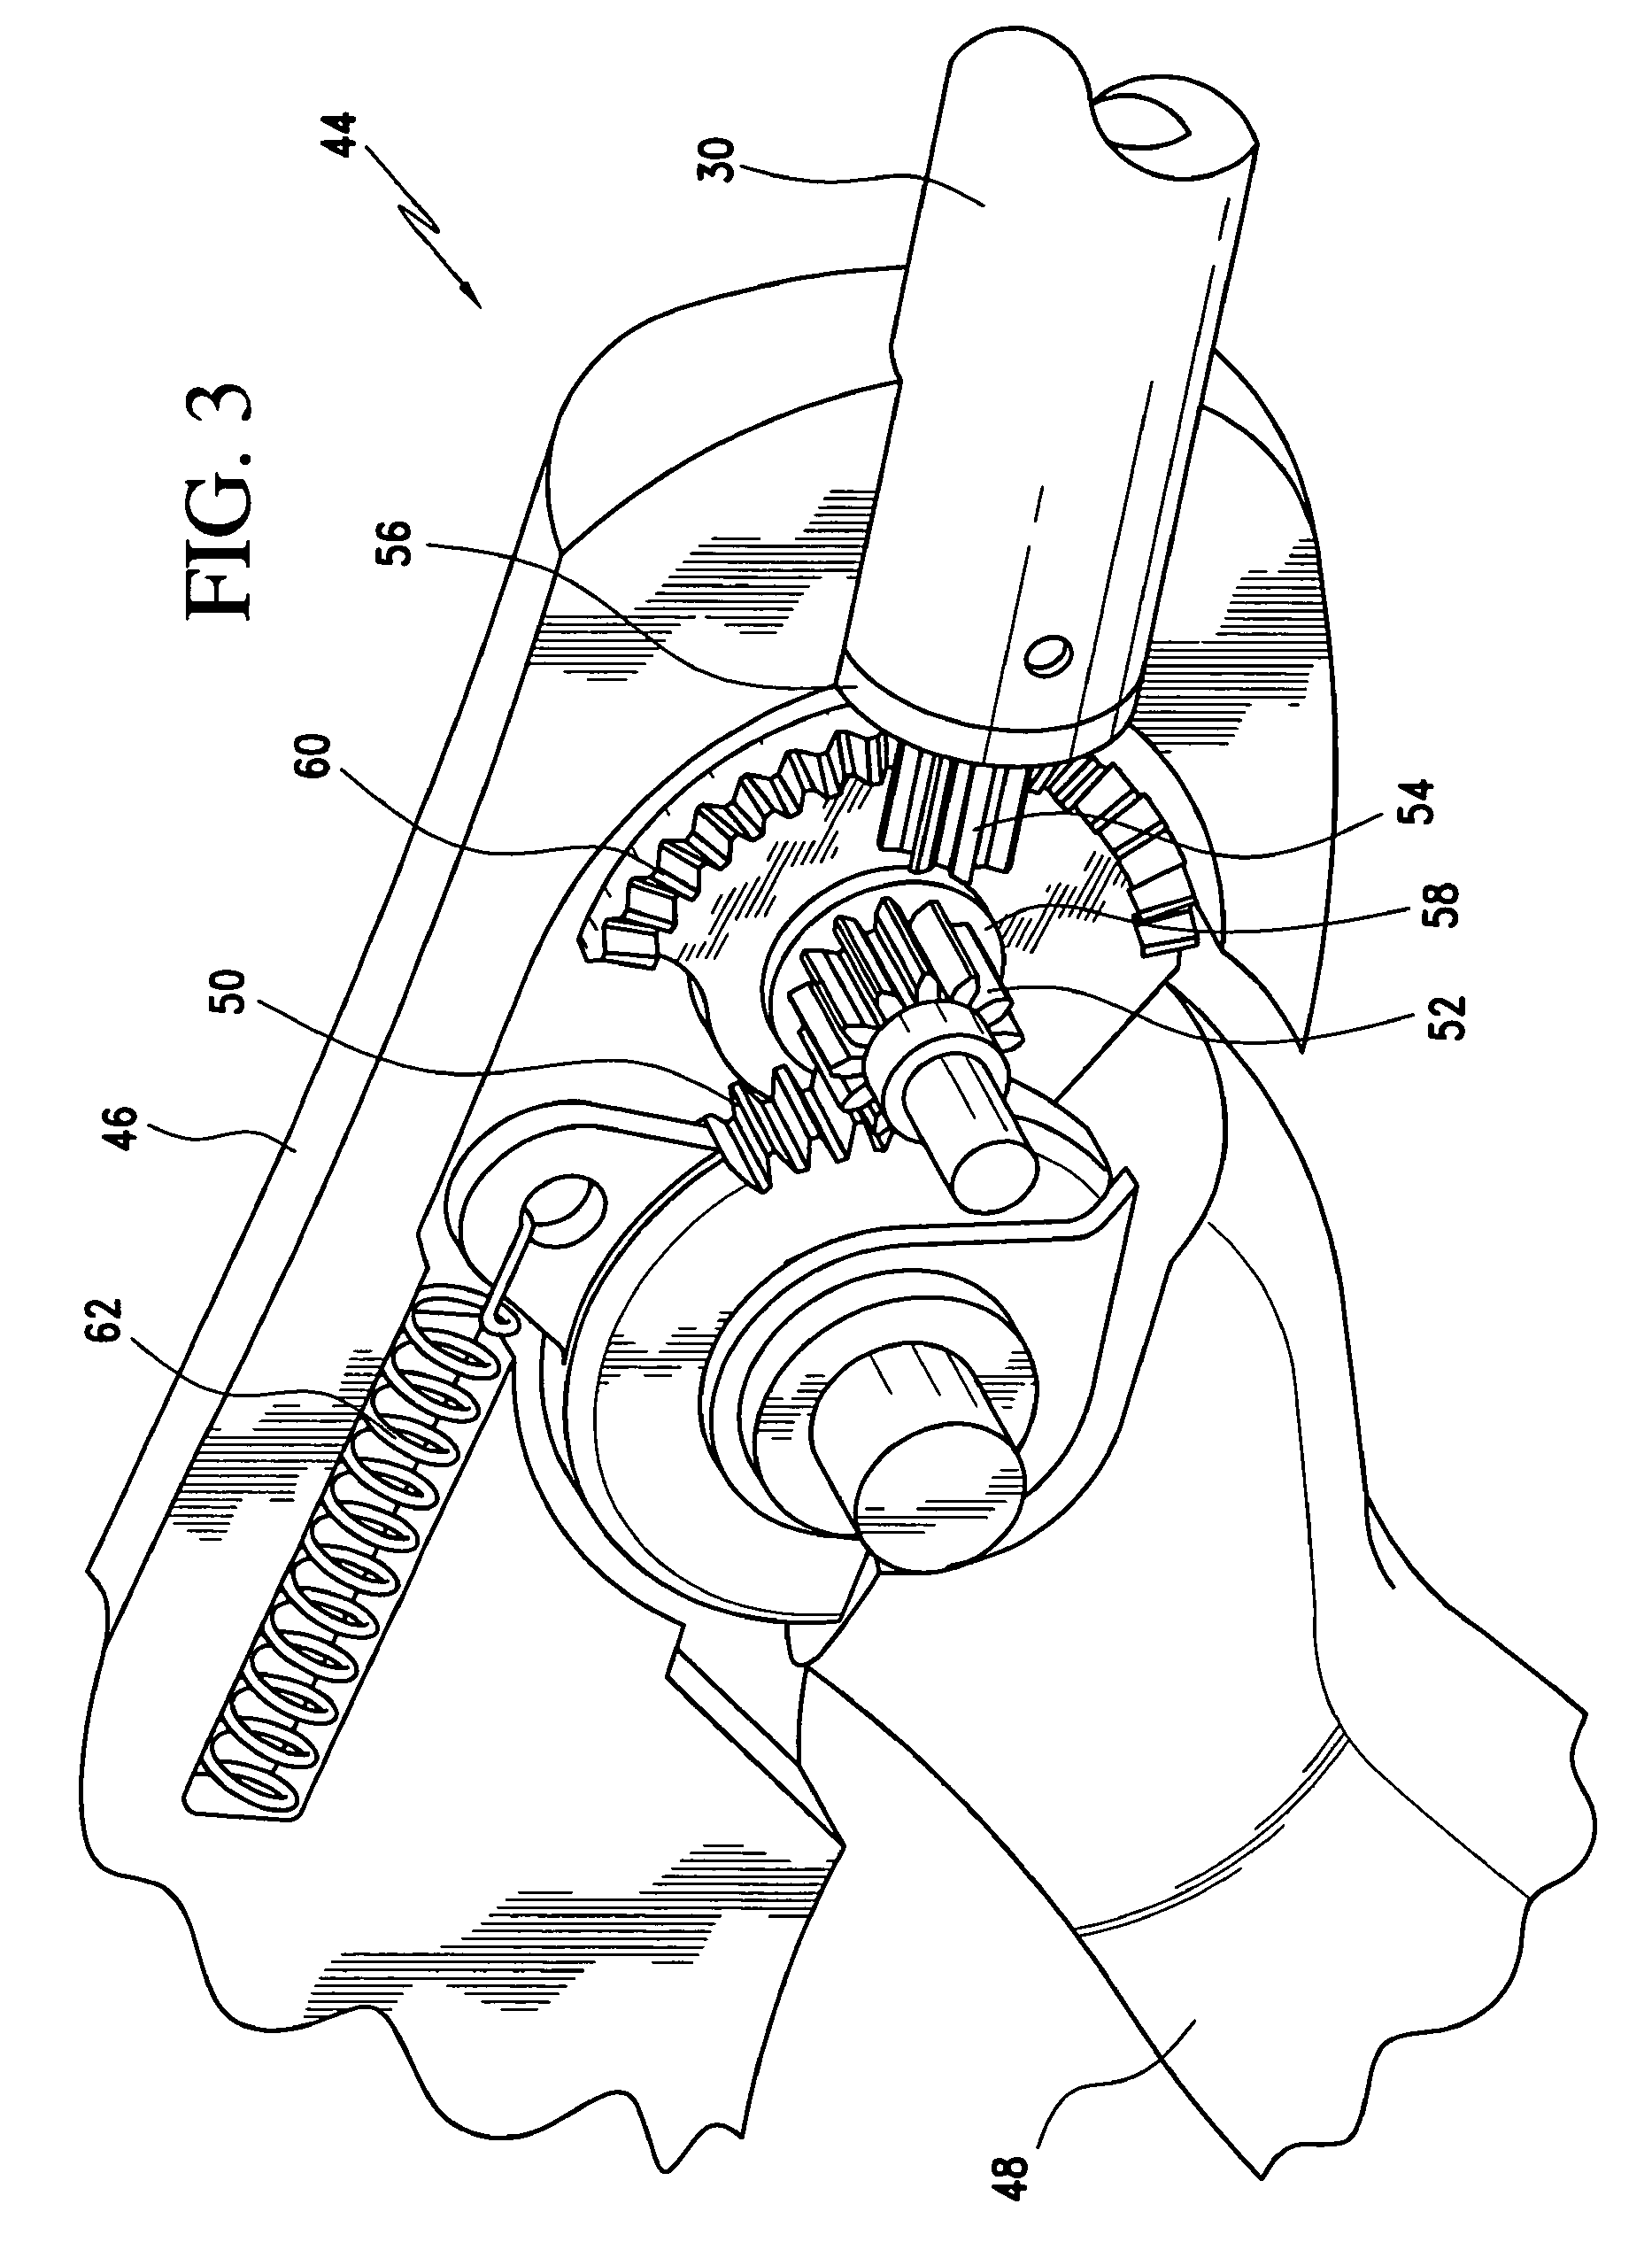 Suturing device with angled head